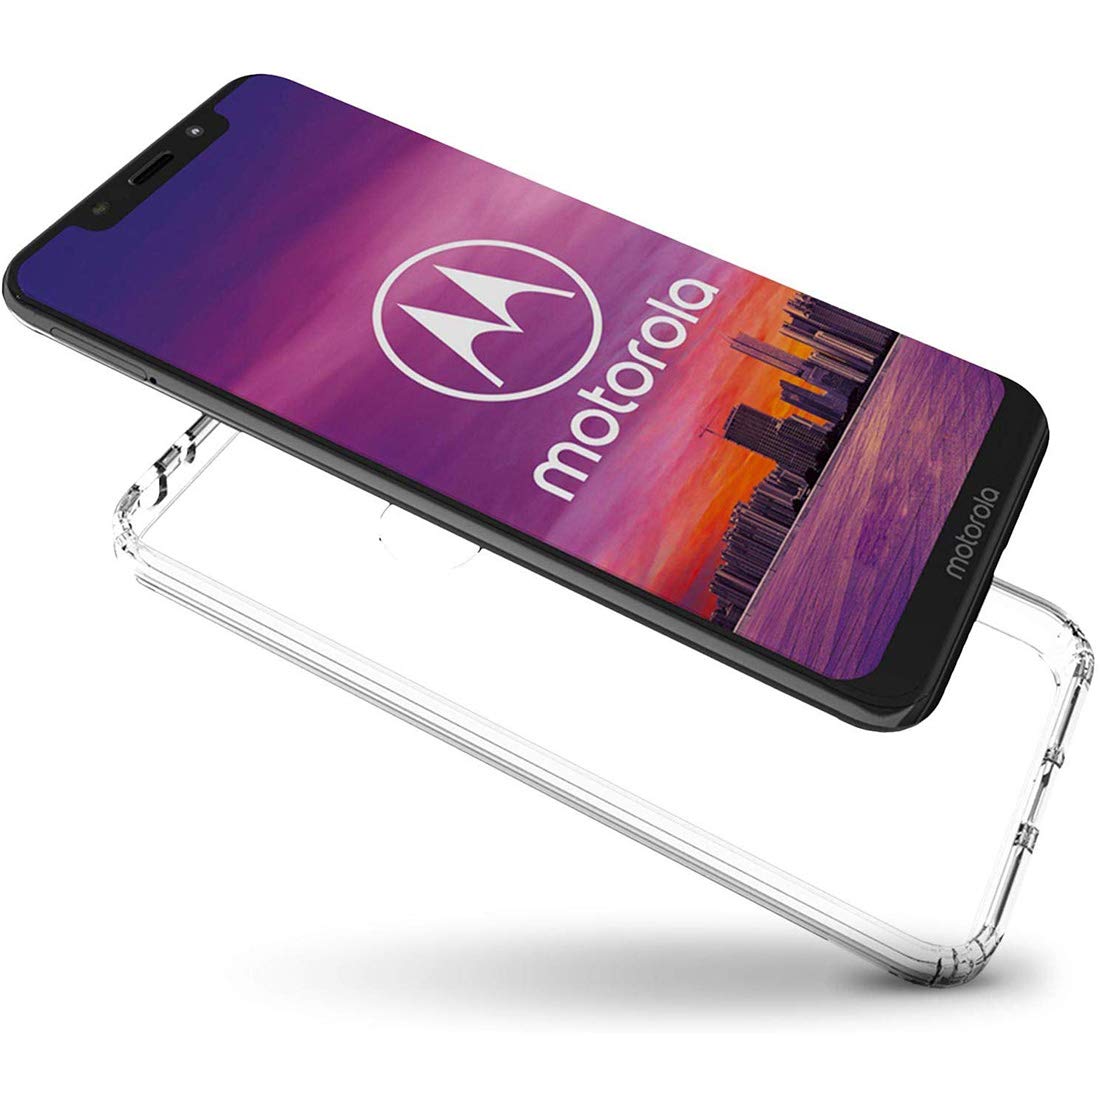 Clear Case for Motorola One